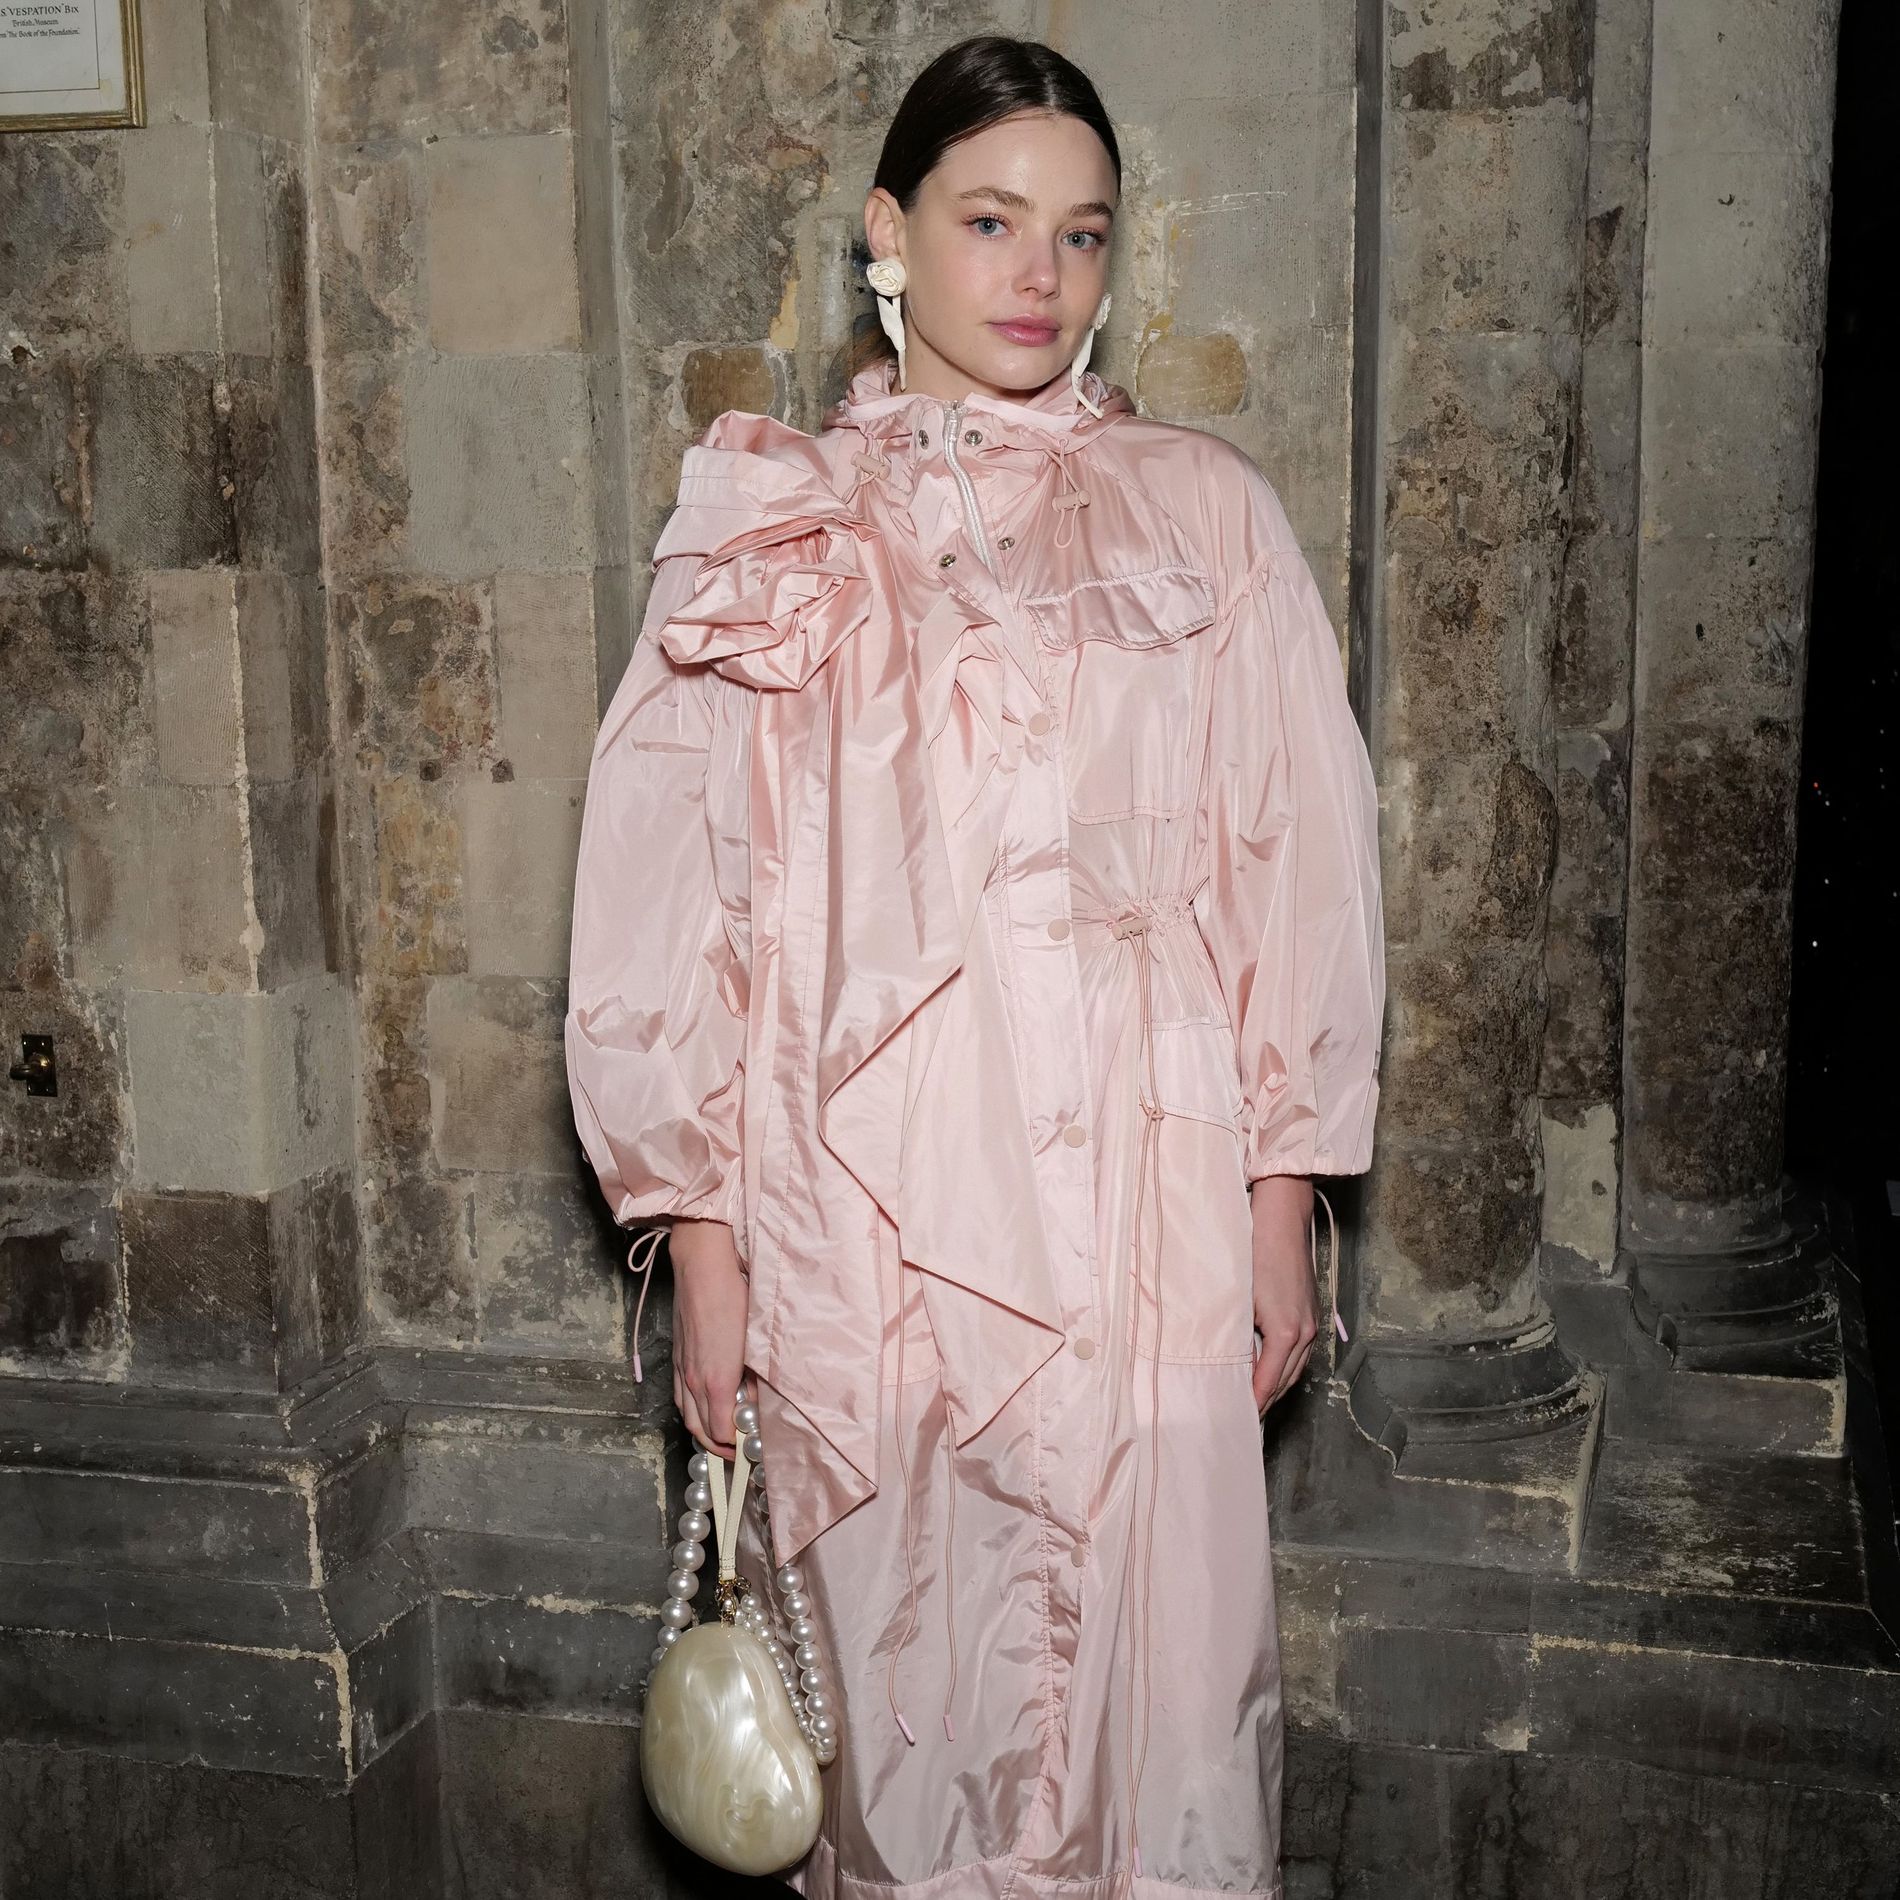 Kristine Froseth wears a pink raincoat with a bow-detailed shoulder, a pearl handbag and embellished crocs to the Simone Rocha AW24 show